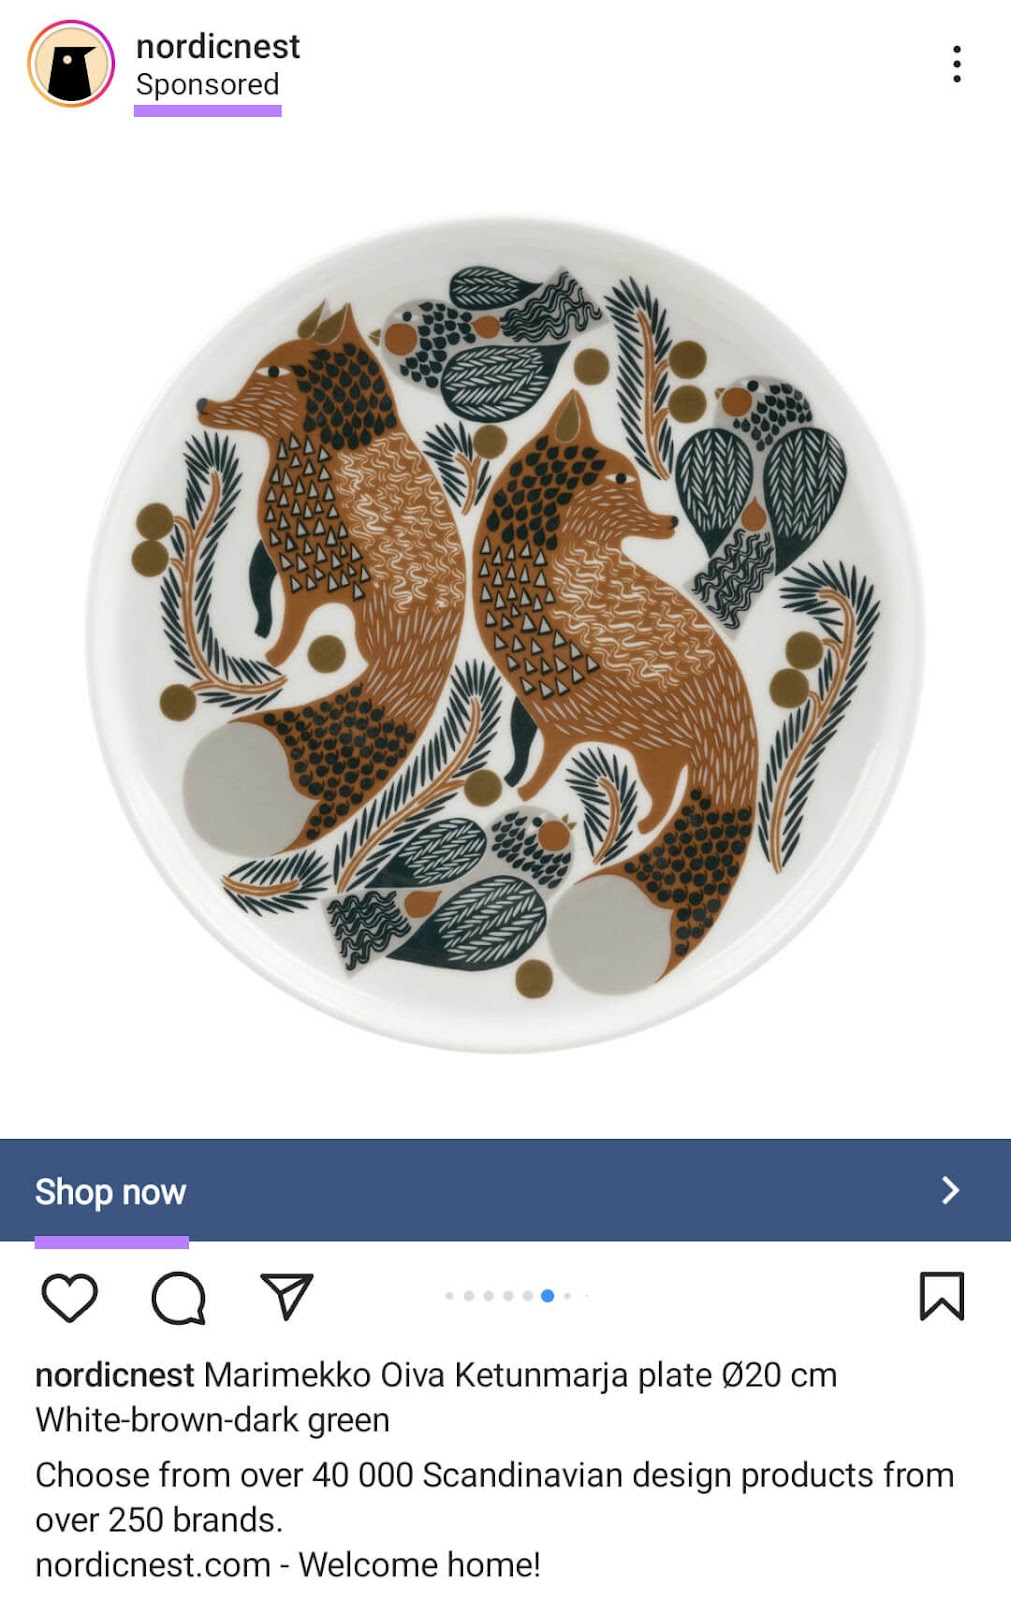 A static image ad on Instagram from nordicnest